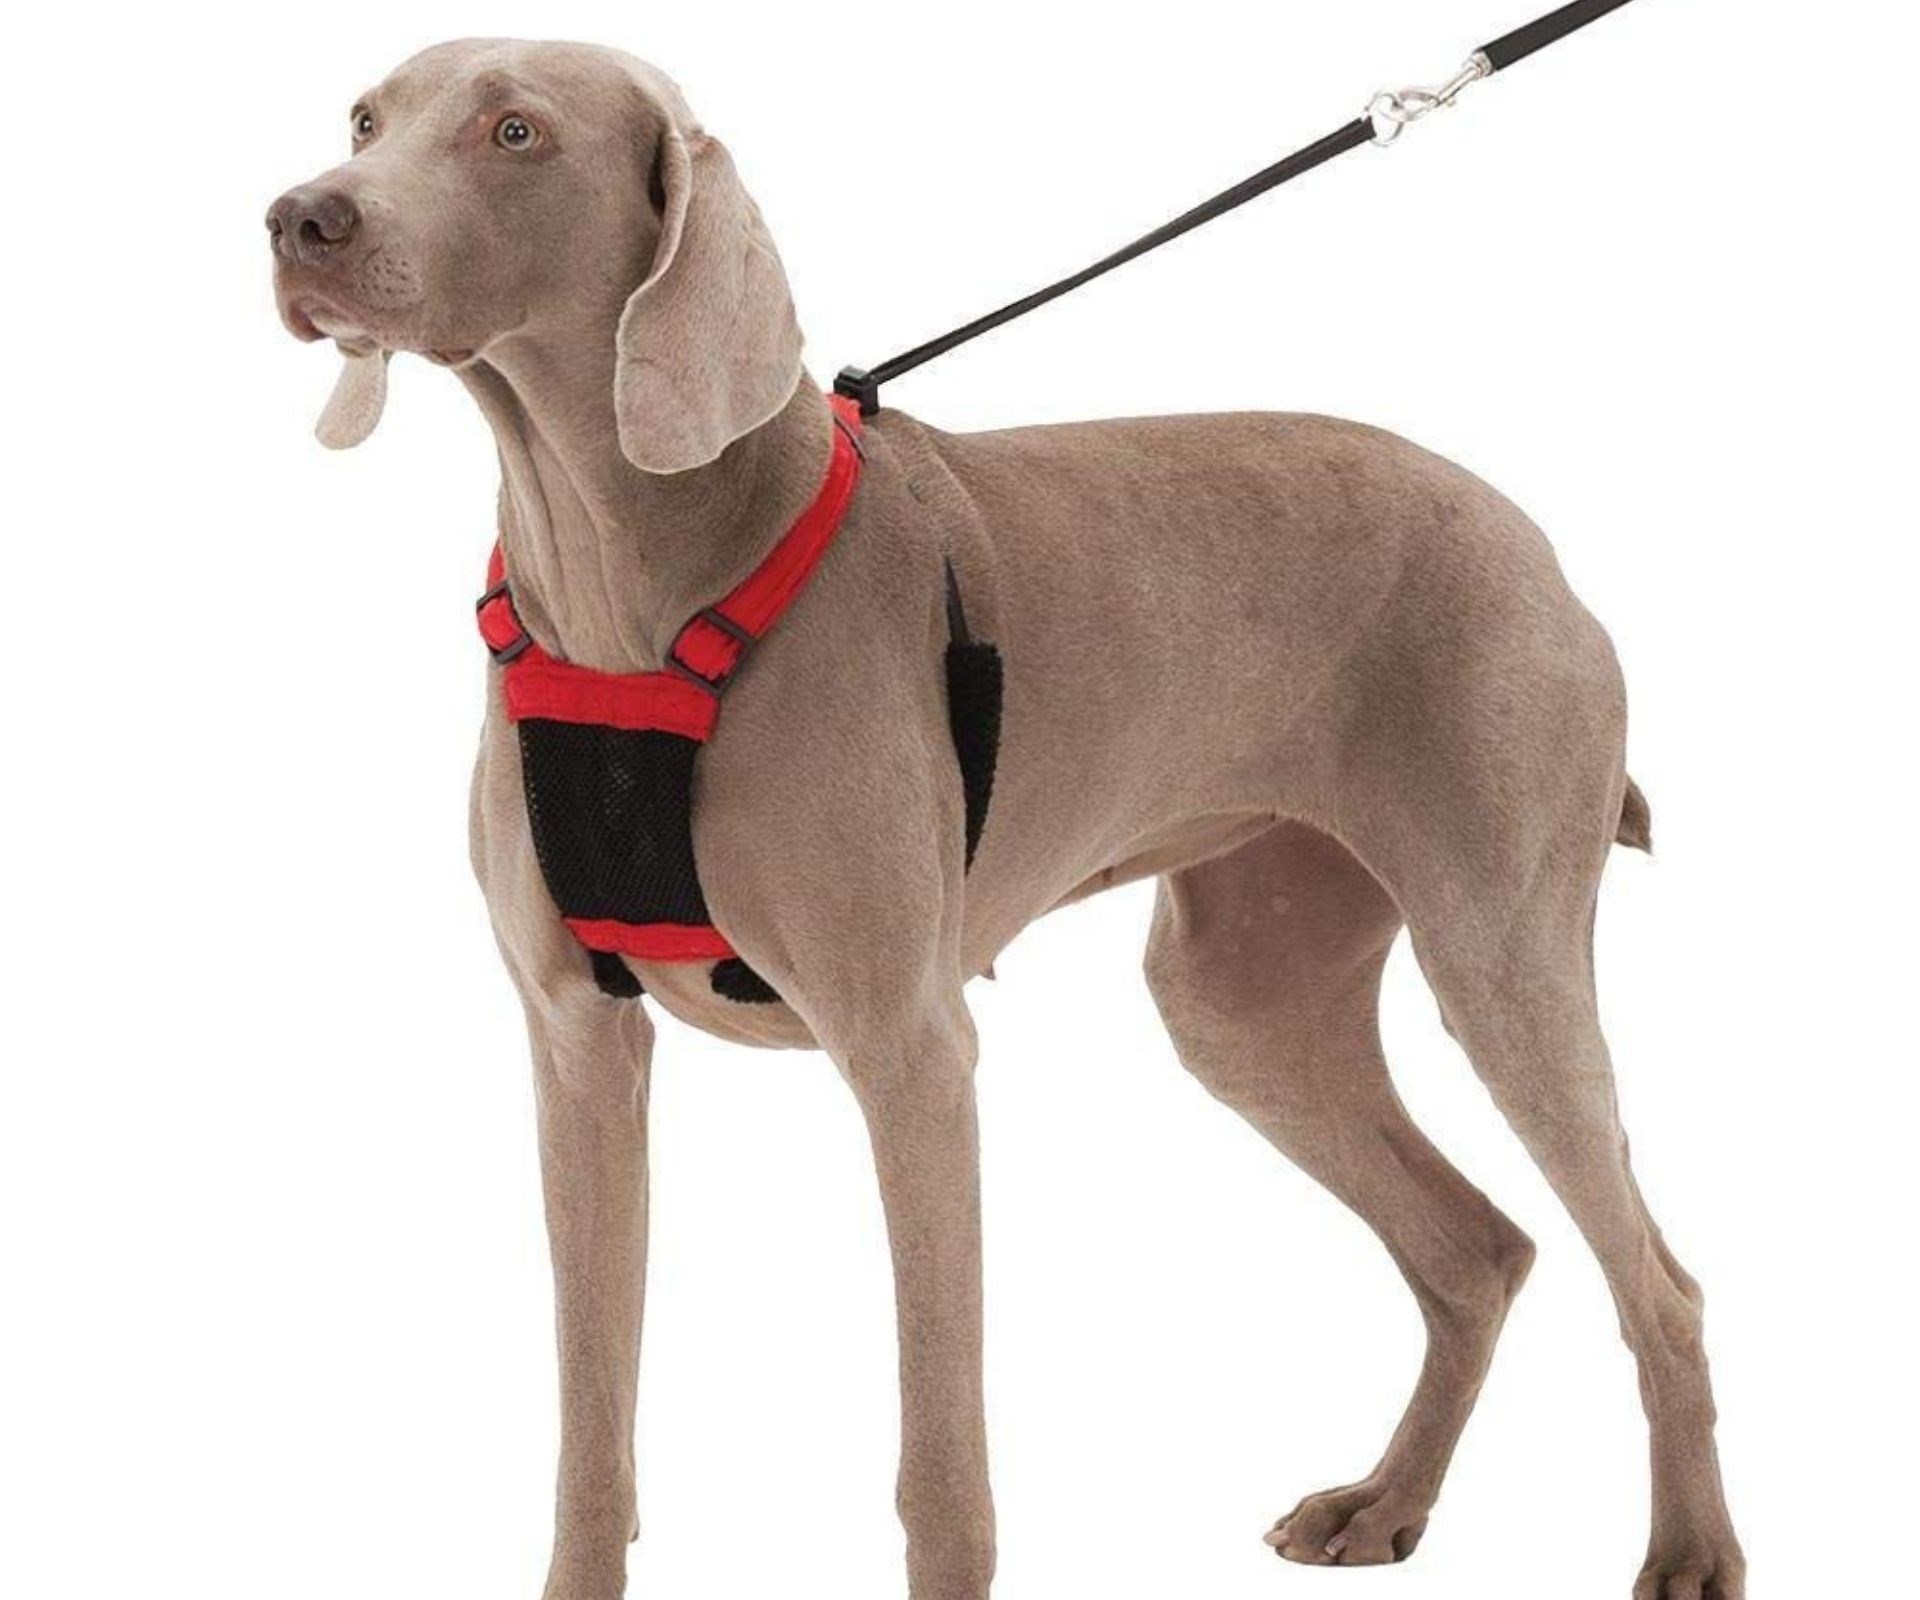 How To Put On A Kmart Dog Harness On Sale, Save 54% | idiomas.to.senac.br